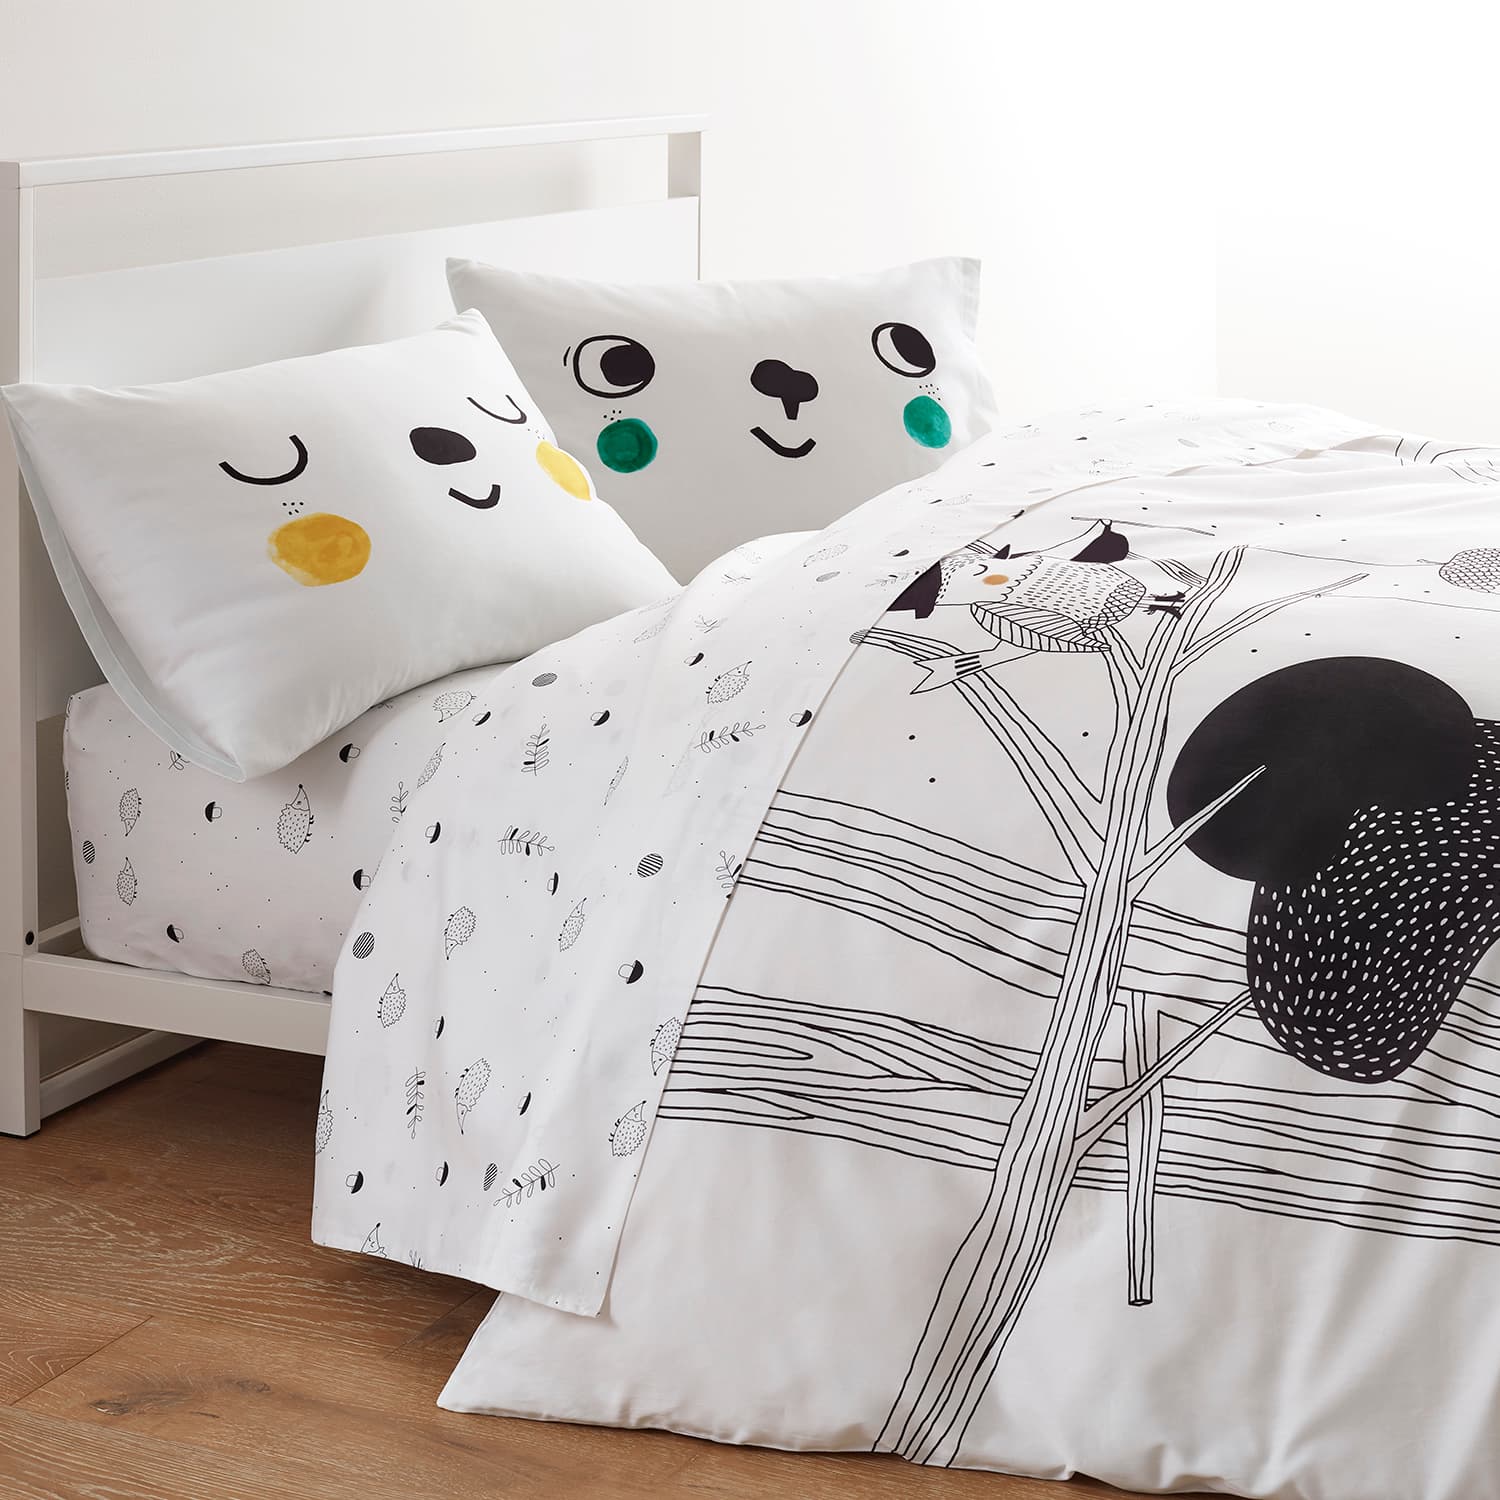 Woodland black and white bedding for kids, duvet and sheet set with woodland forest theme, hedgehog, fox, badger, squirrel.